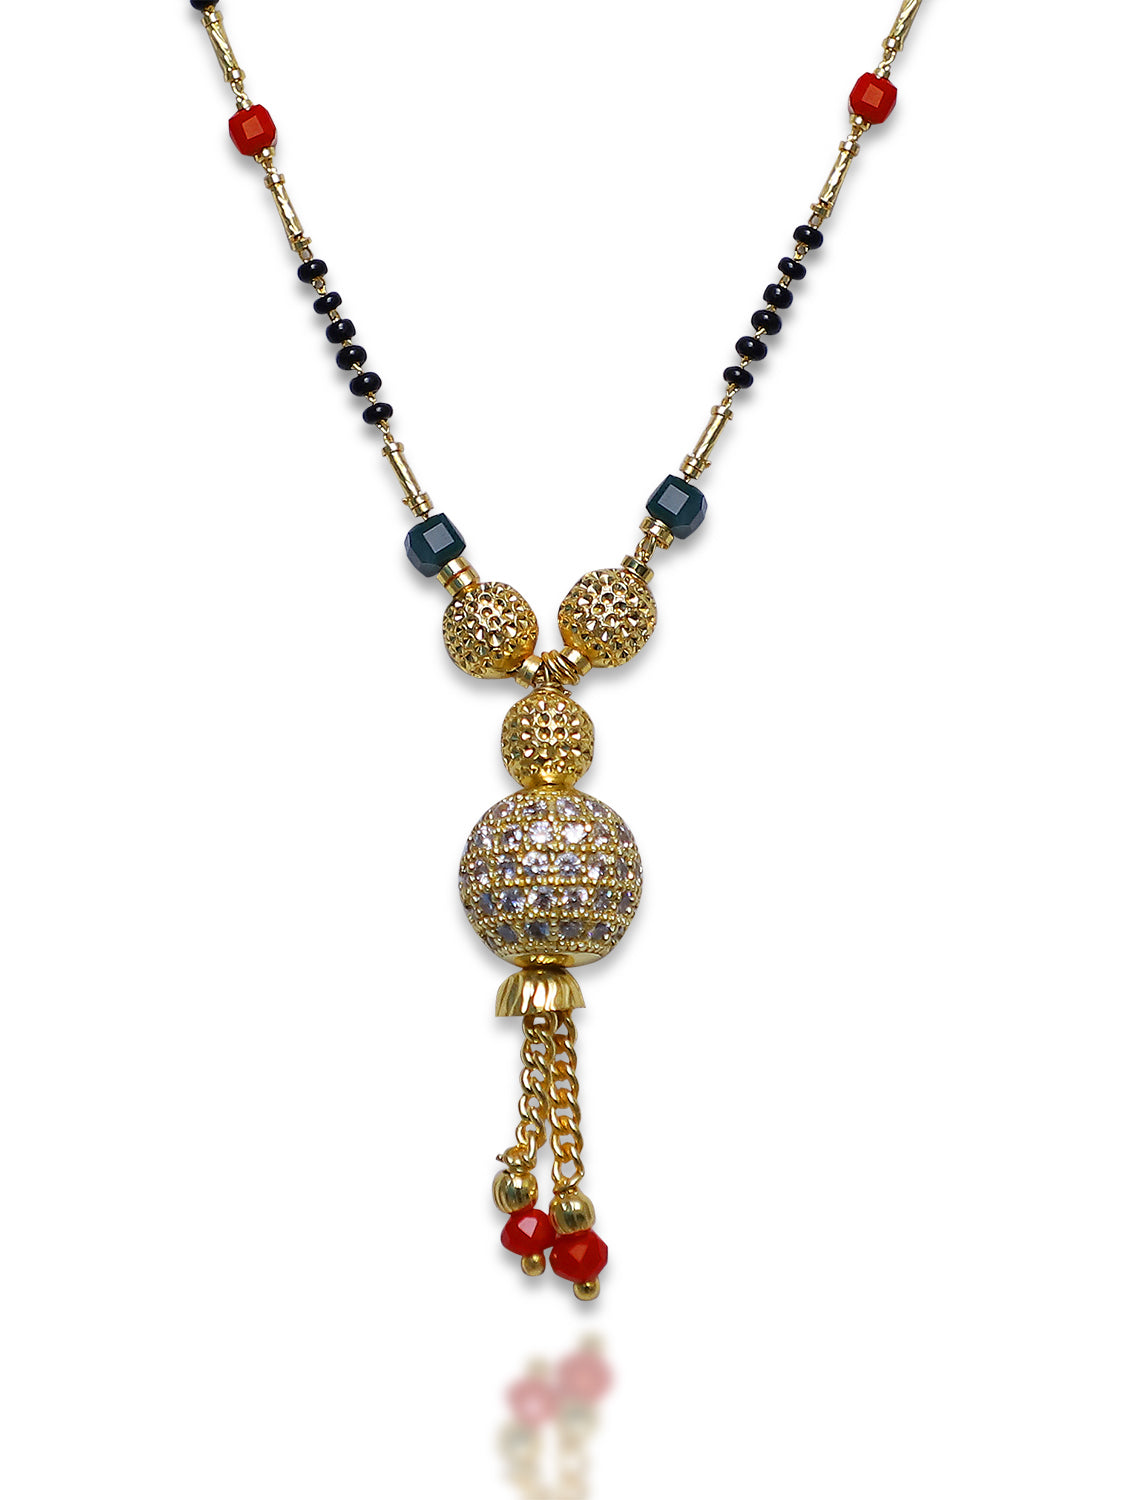 Short Mangalsutra Designs Gold Plated मंगळसूत्र Black Red Green Beads Latkan Pendant (20 Inches)